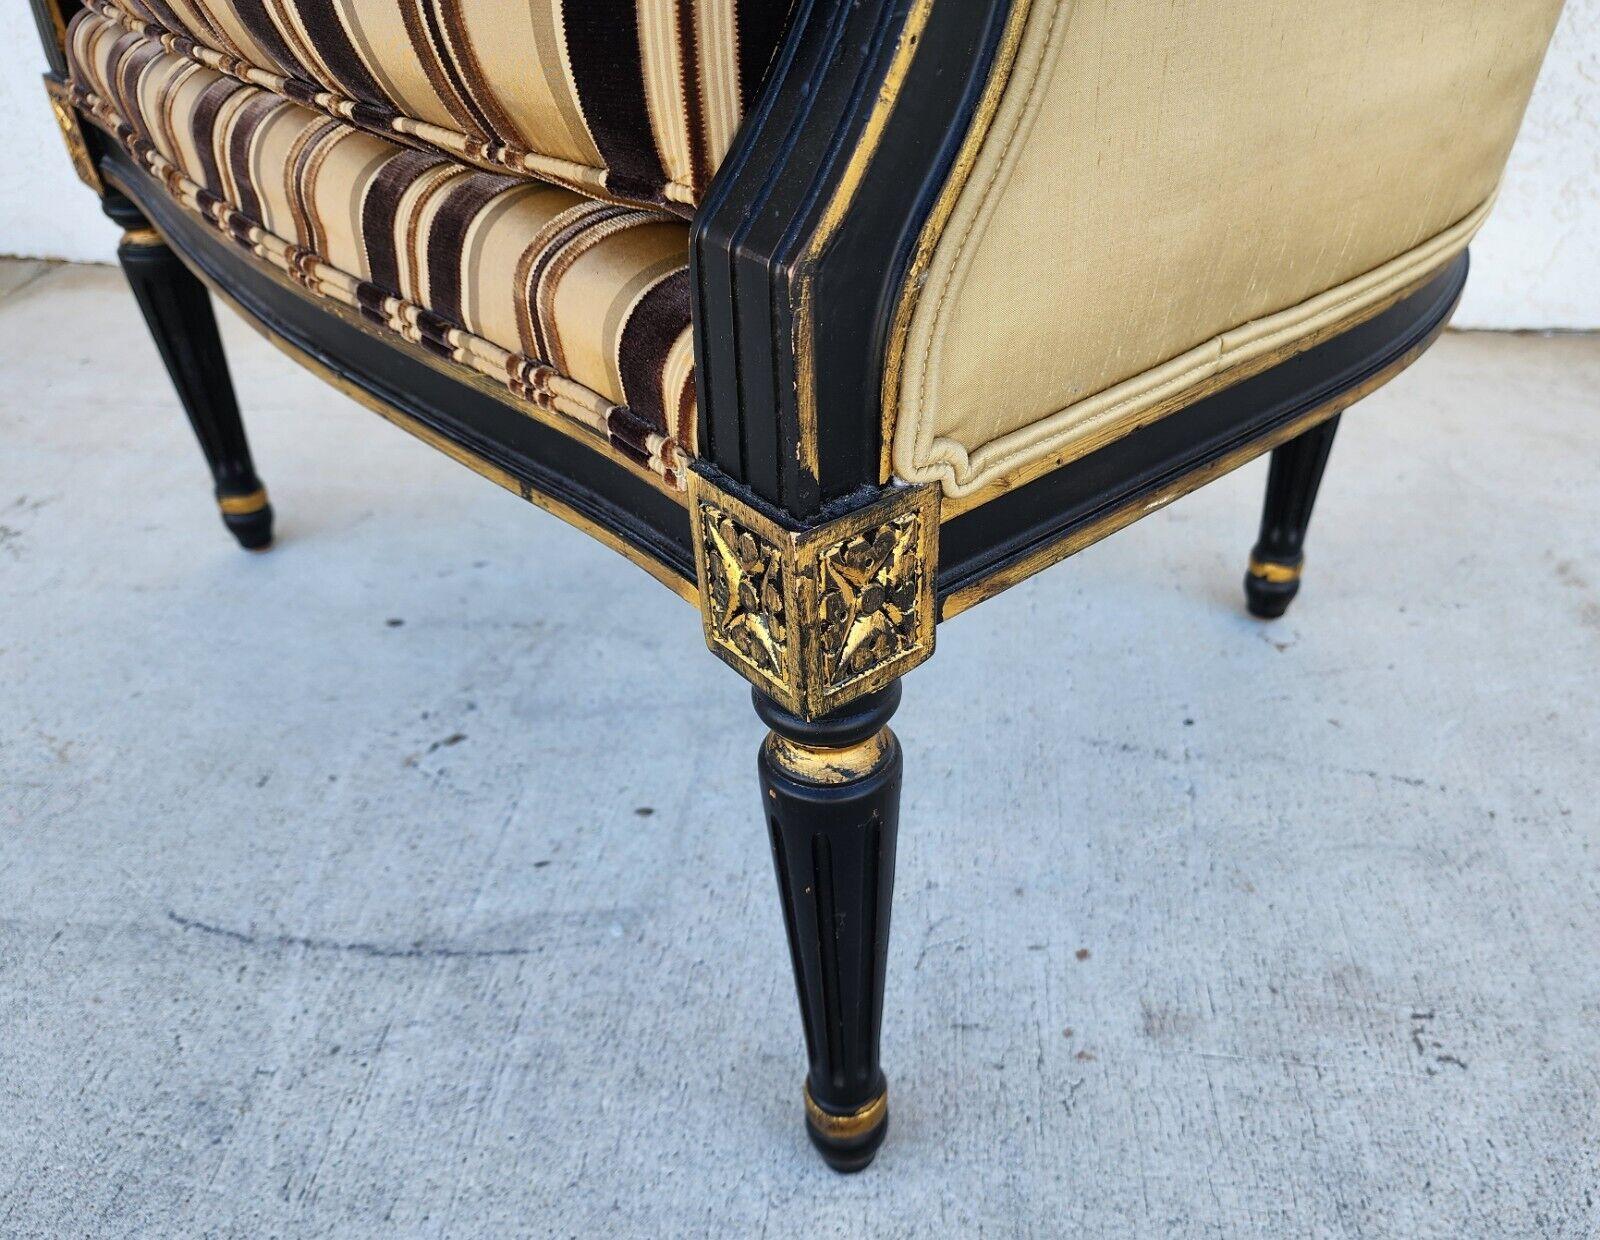 Offering one of our recent Palm Beach Estate Fine Furniture Acquisitions of a 
Louis XVI Style Bergere armchair by Century furniture
Sides and back are silk. Seat and inside are velvet.

Approximate Measurements in Inches
41